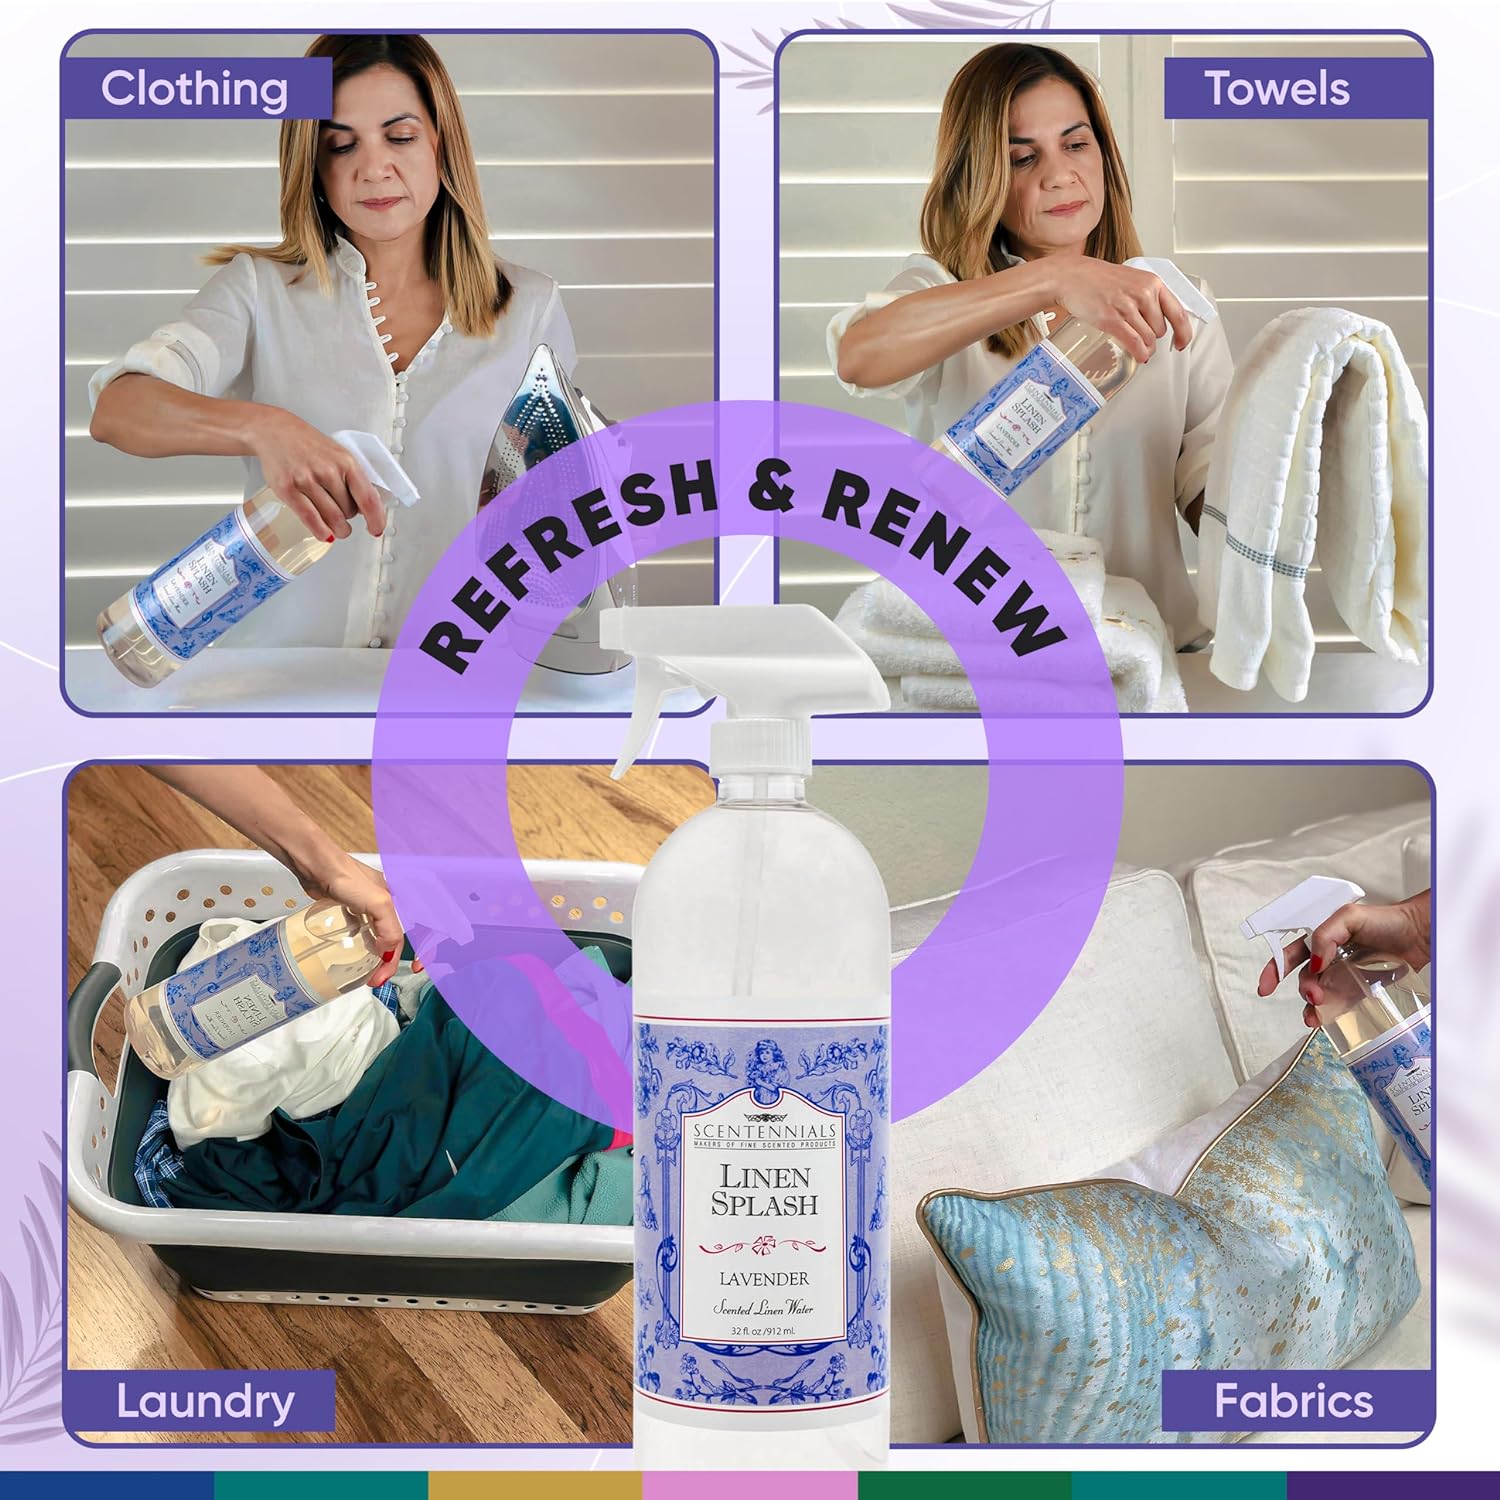 Scentennials Lavender Linen and Room Spray 32oz, Refreshing Bed Linen Spray, Luxurious Scent, Ideal for Freshening Linens, Laundry Basket & Home Ambiance : Home & Kitchen